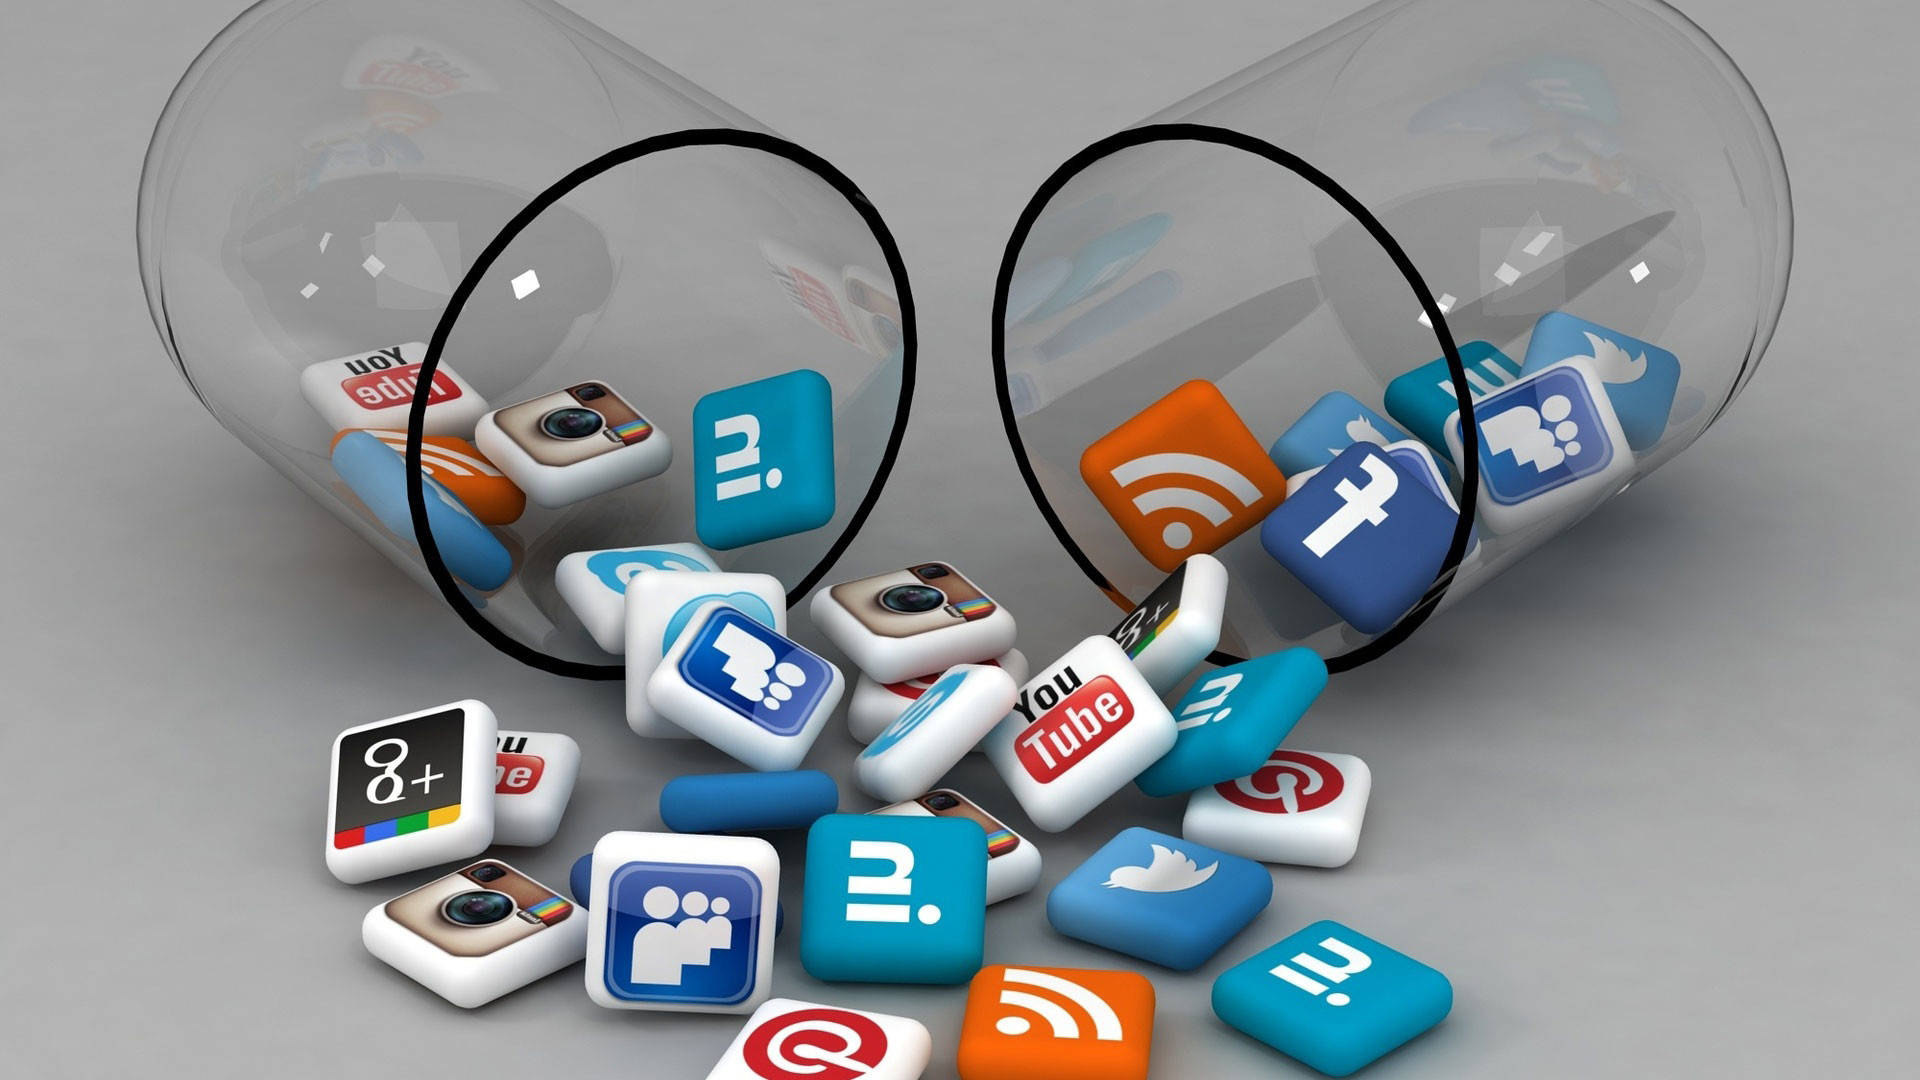 Social Media Icons Spilling Out Of Jar Background